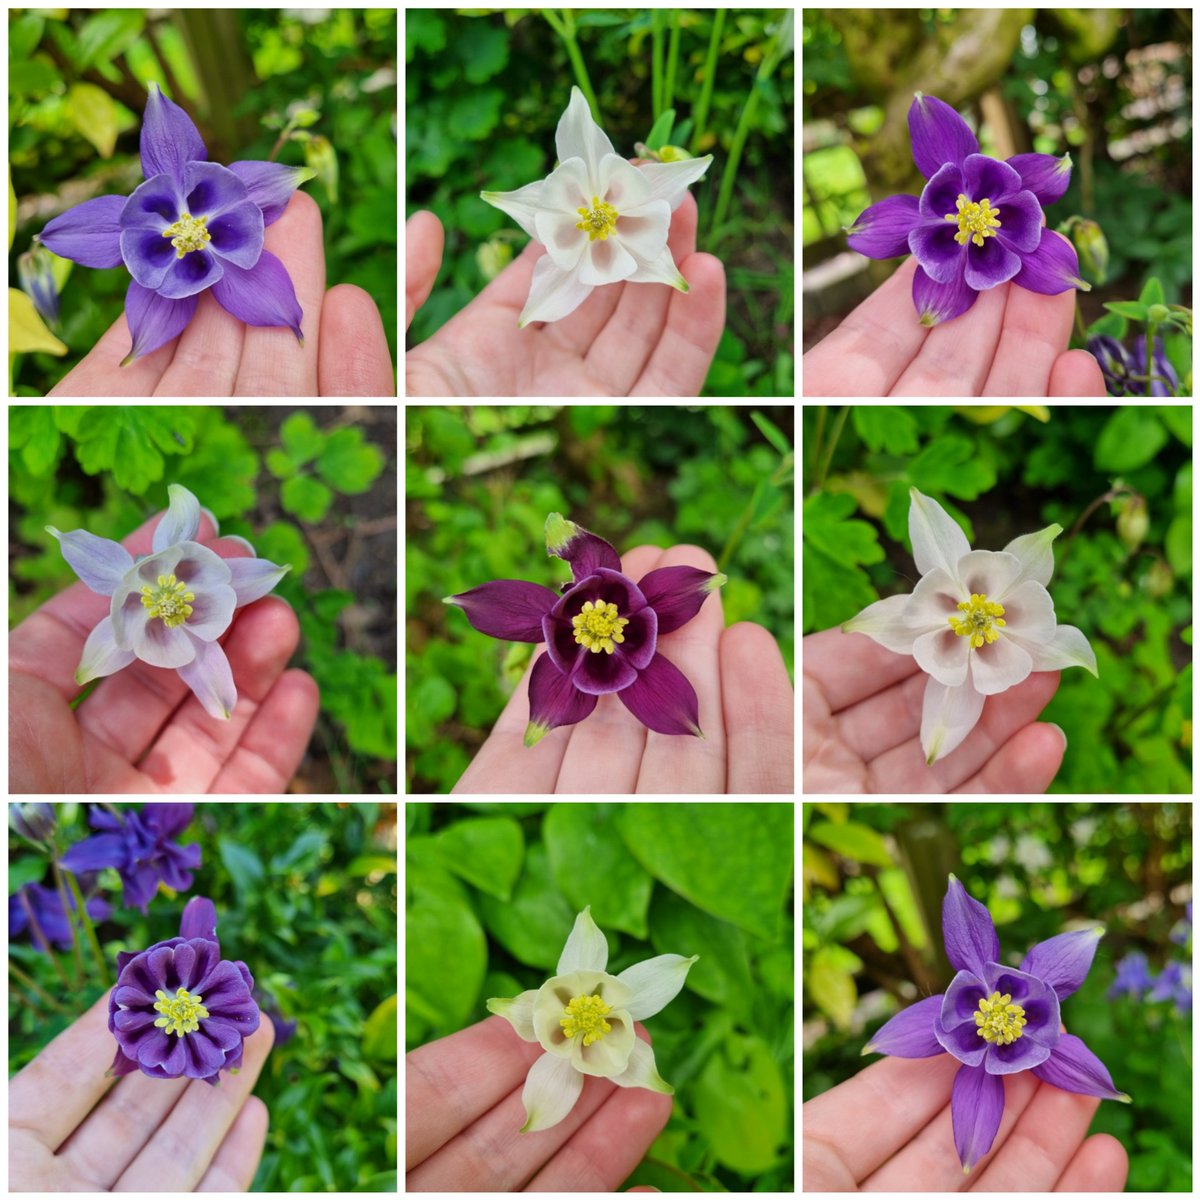 Some of the Aquilegias that have popped up in my garden this year. I'm loving the bluey purples 💜 #FlowersOnFriday #FlowerHunting